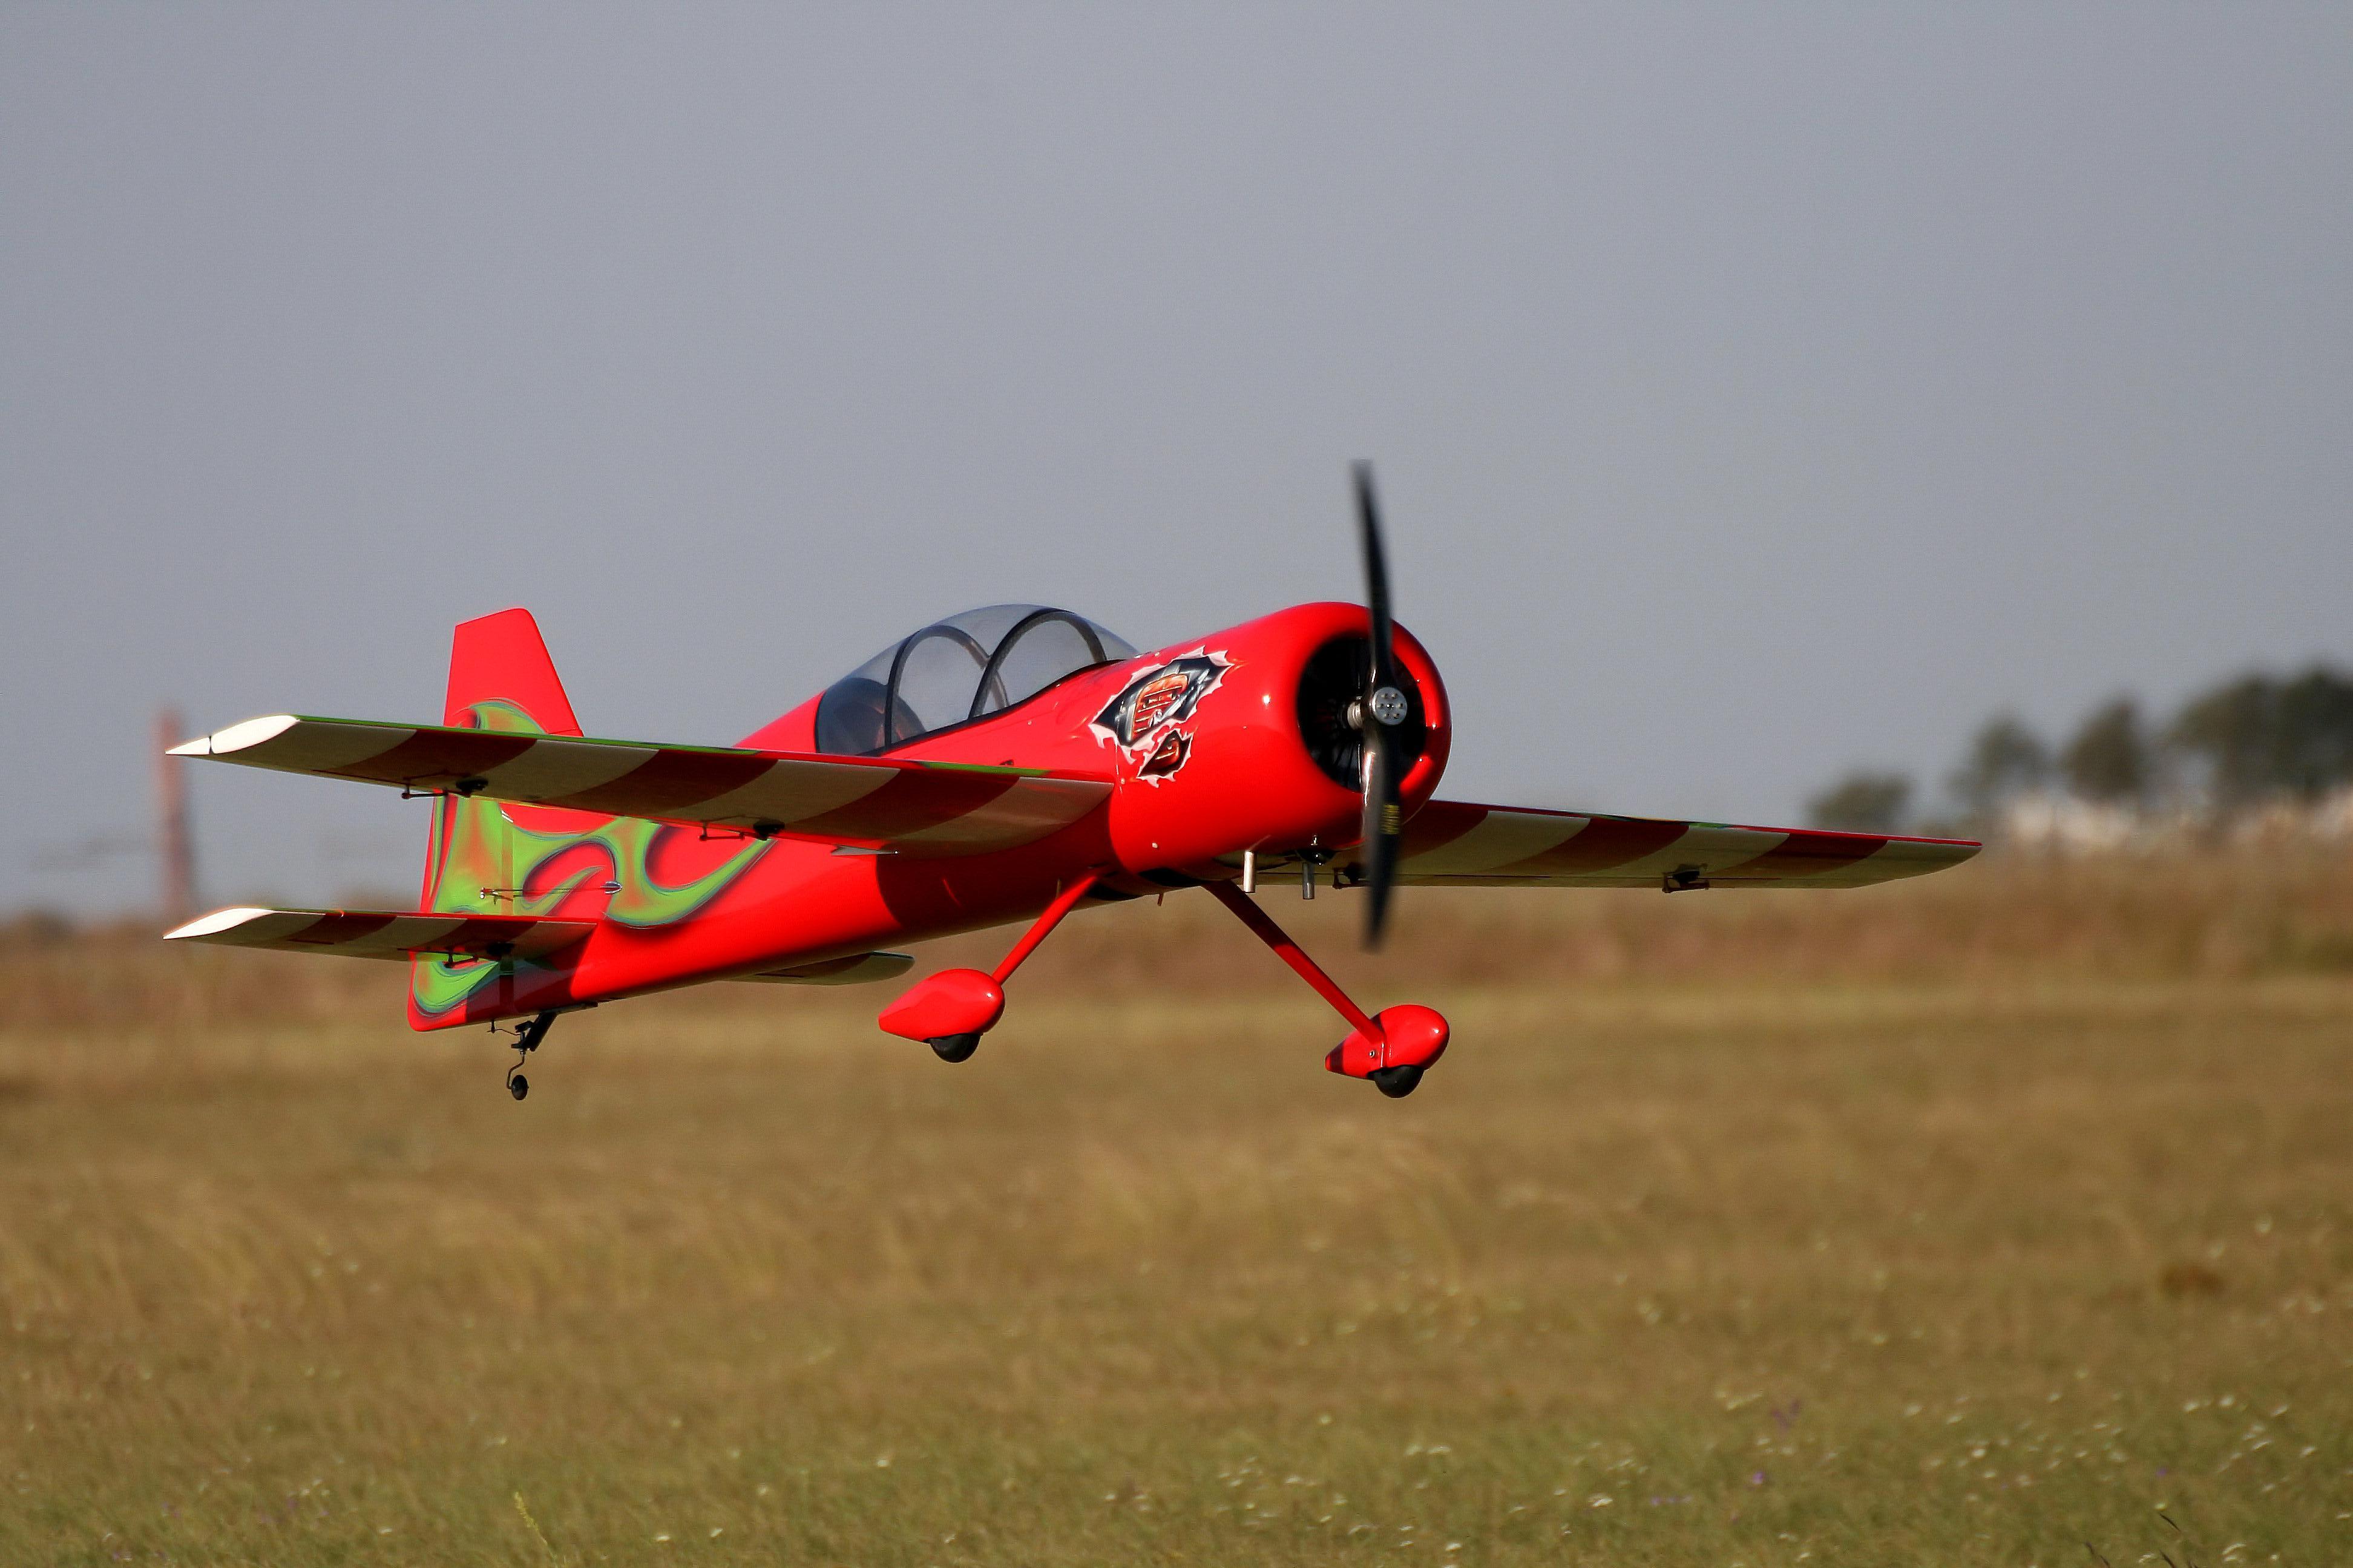 Radio Controlled Airplane Aircraft Plane Toy Model F Wallpaper